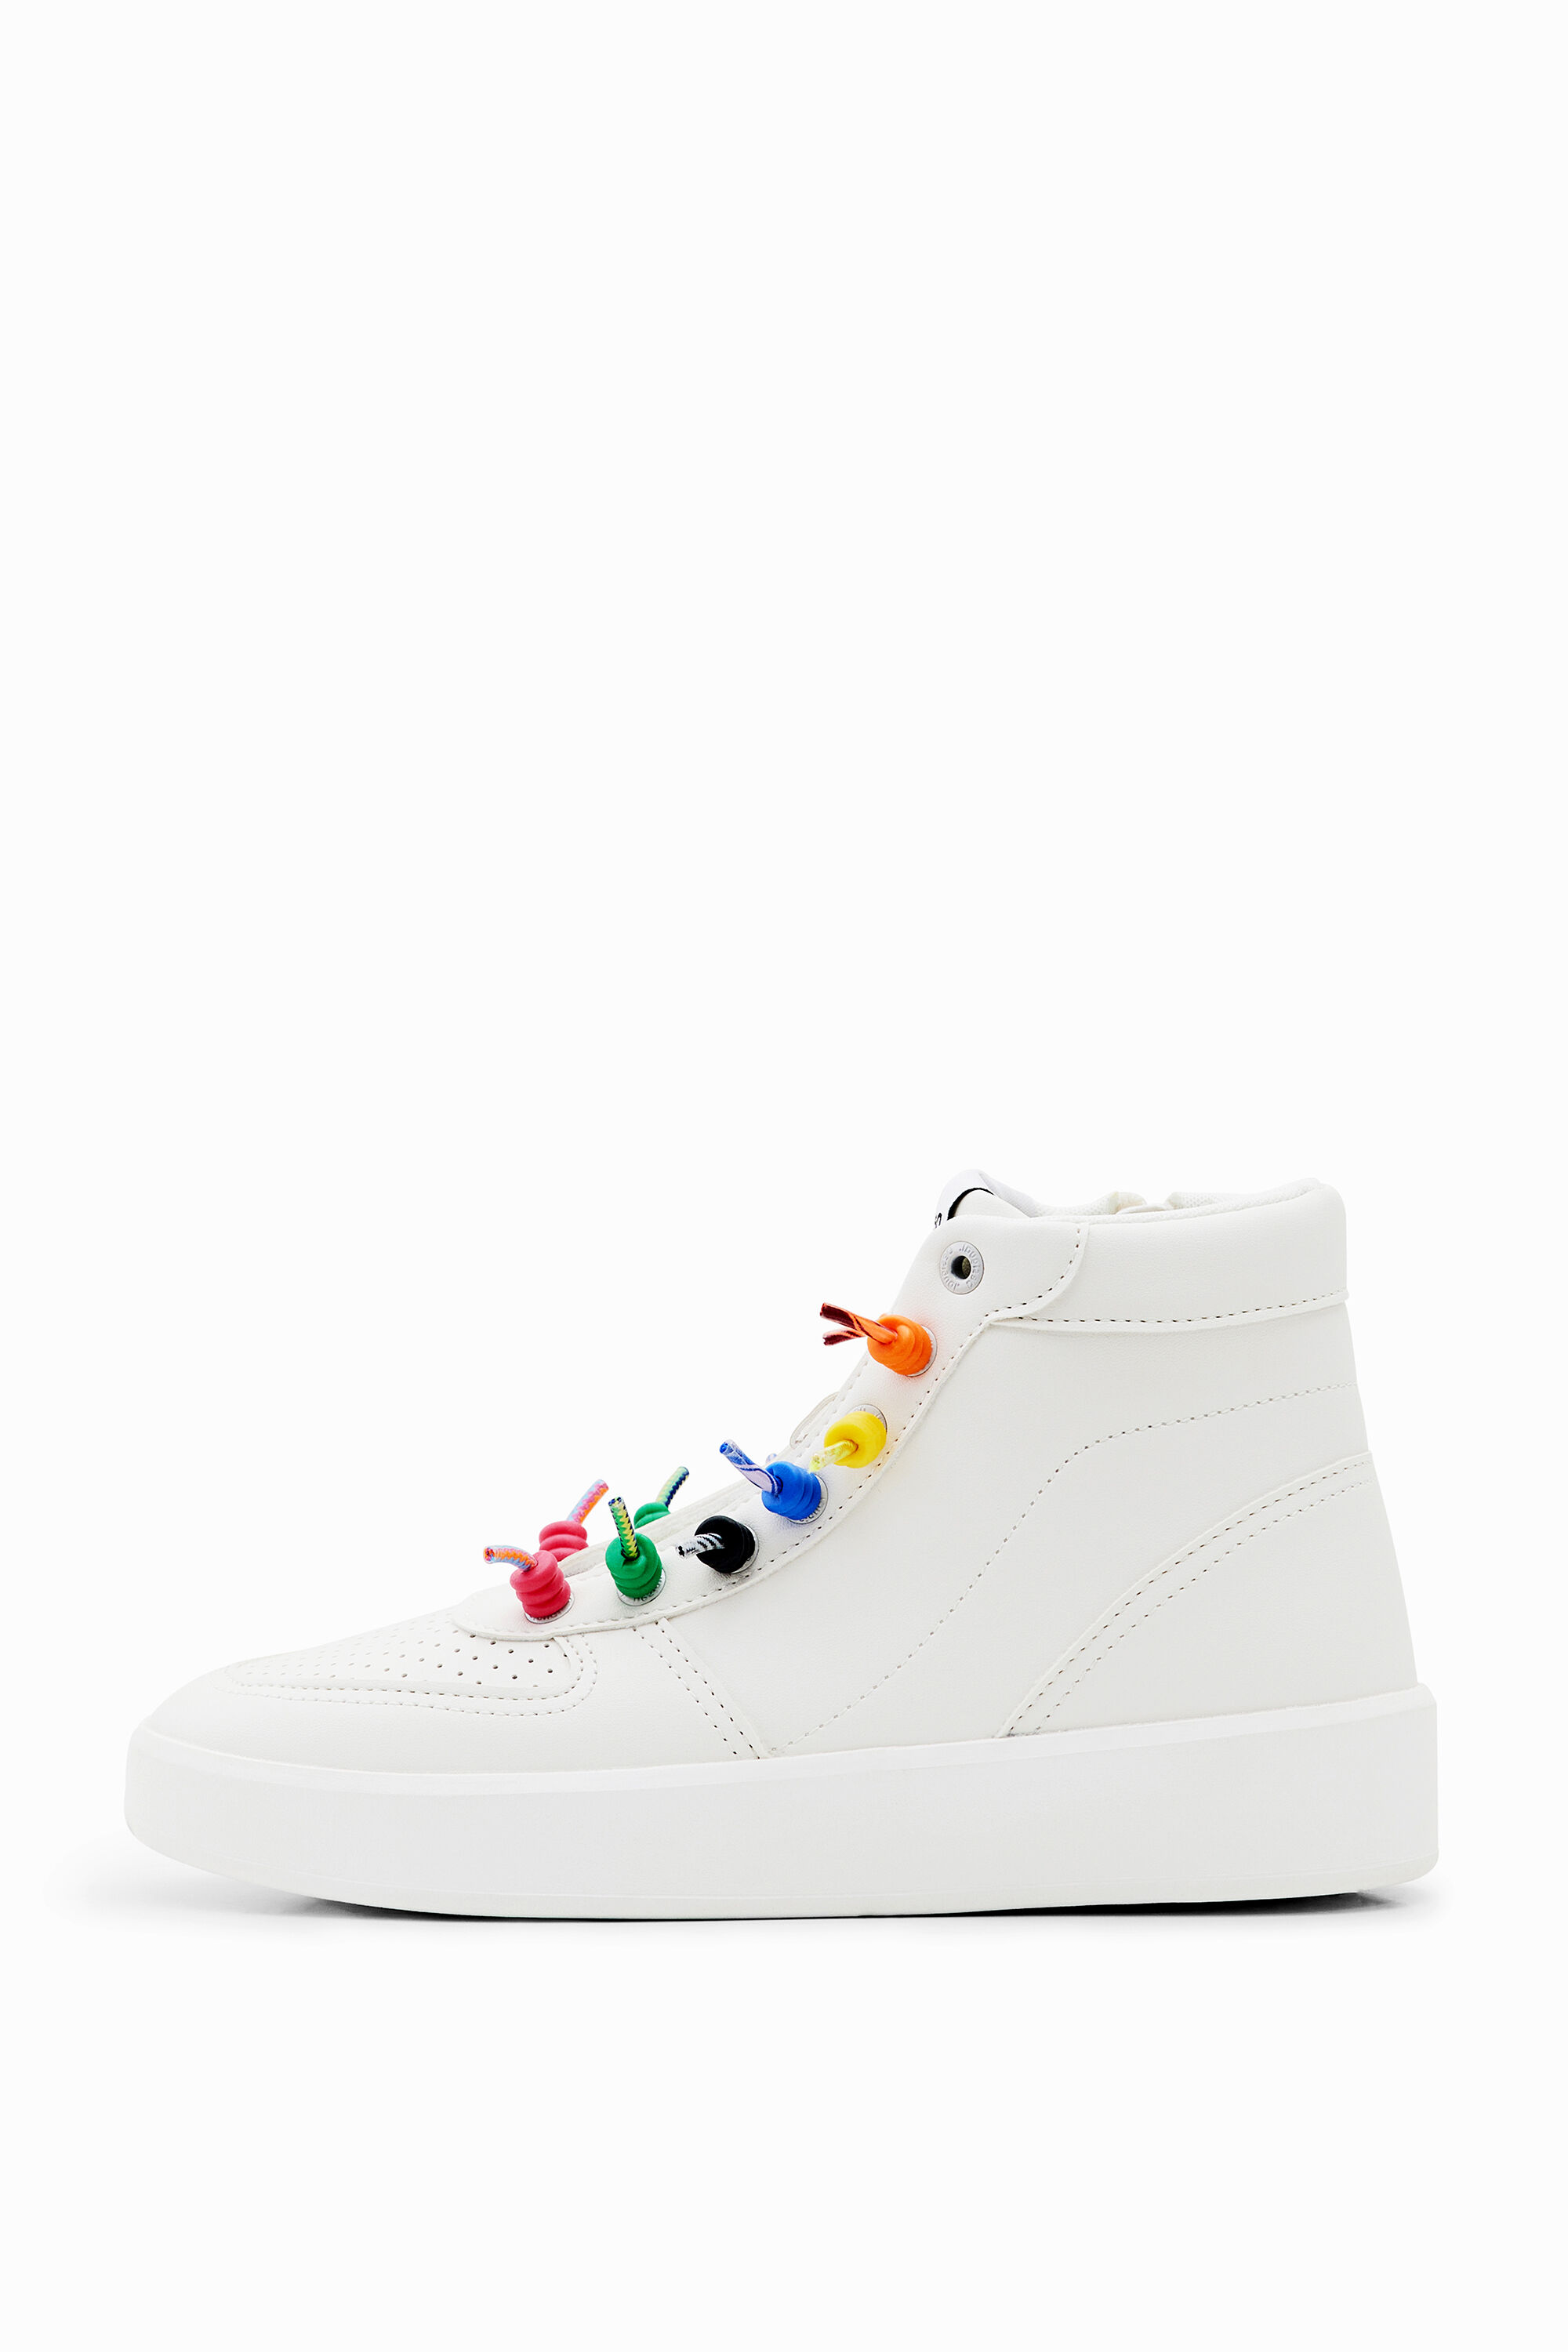 Rainbow lace high-top sneakers - WHITE - 38